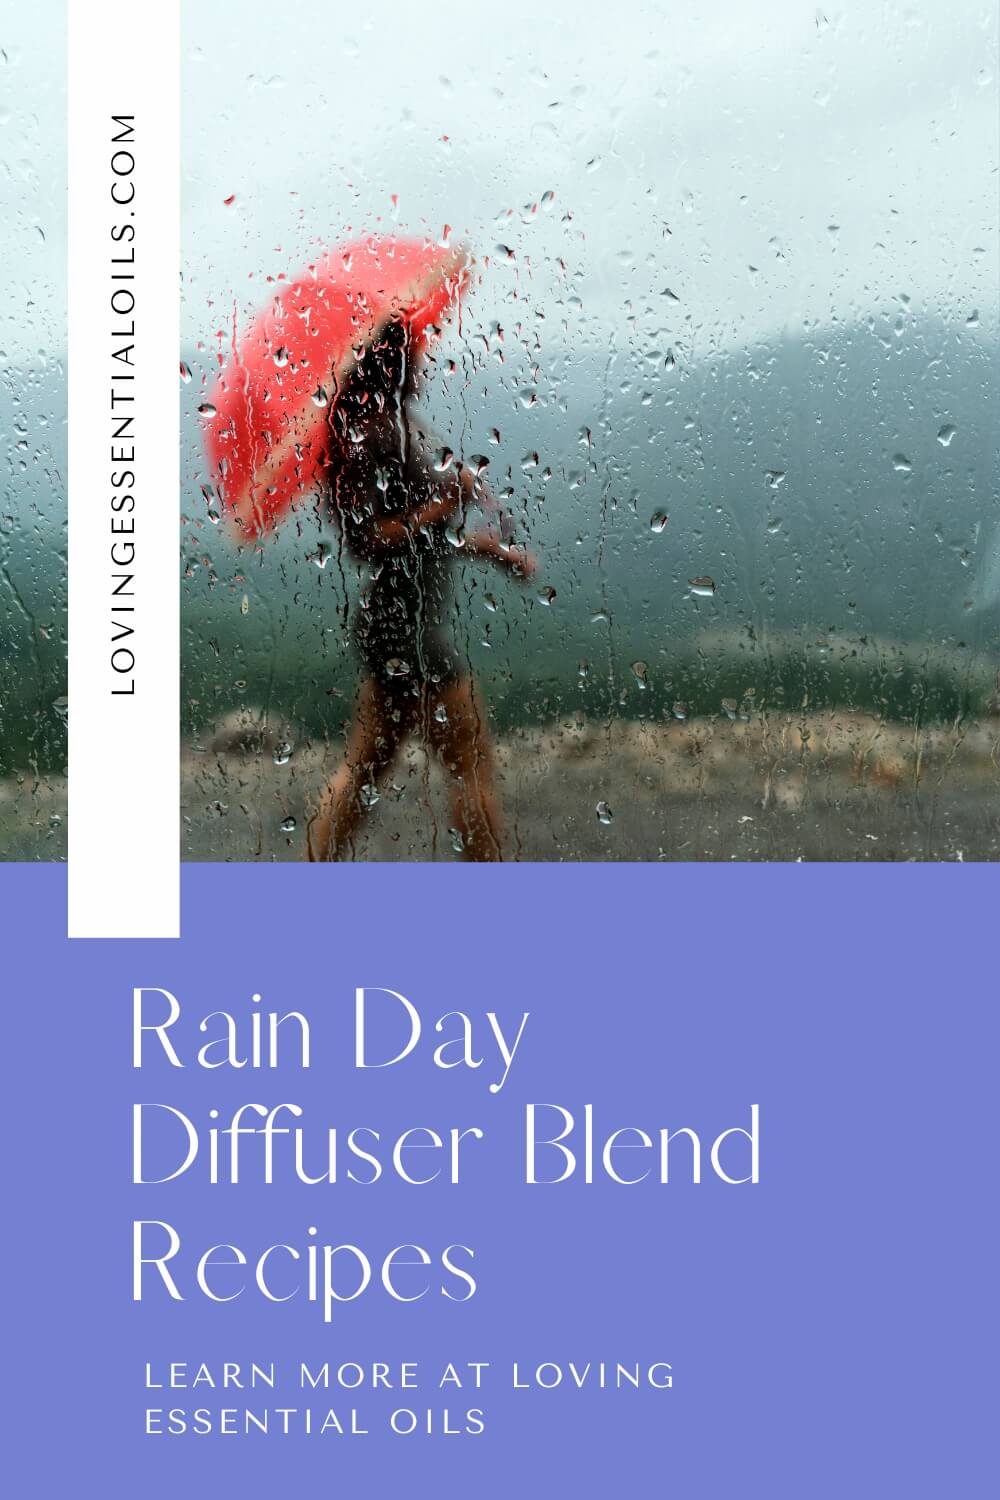 Rain Day Diffuser Blend Recipes by Loving Essential Oils